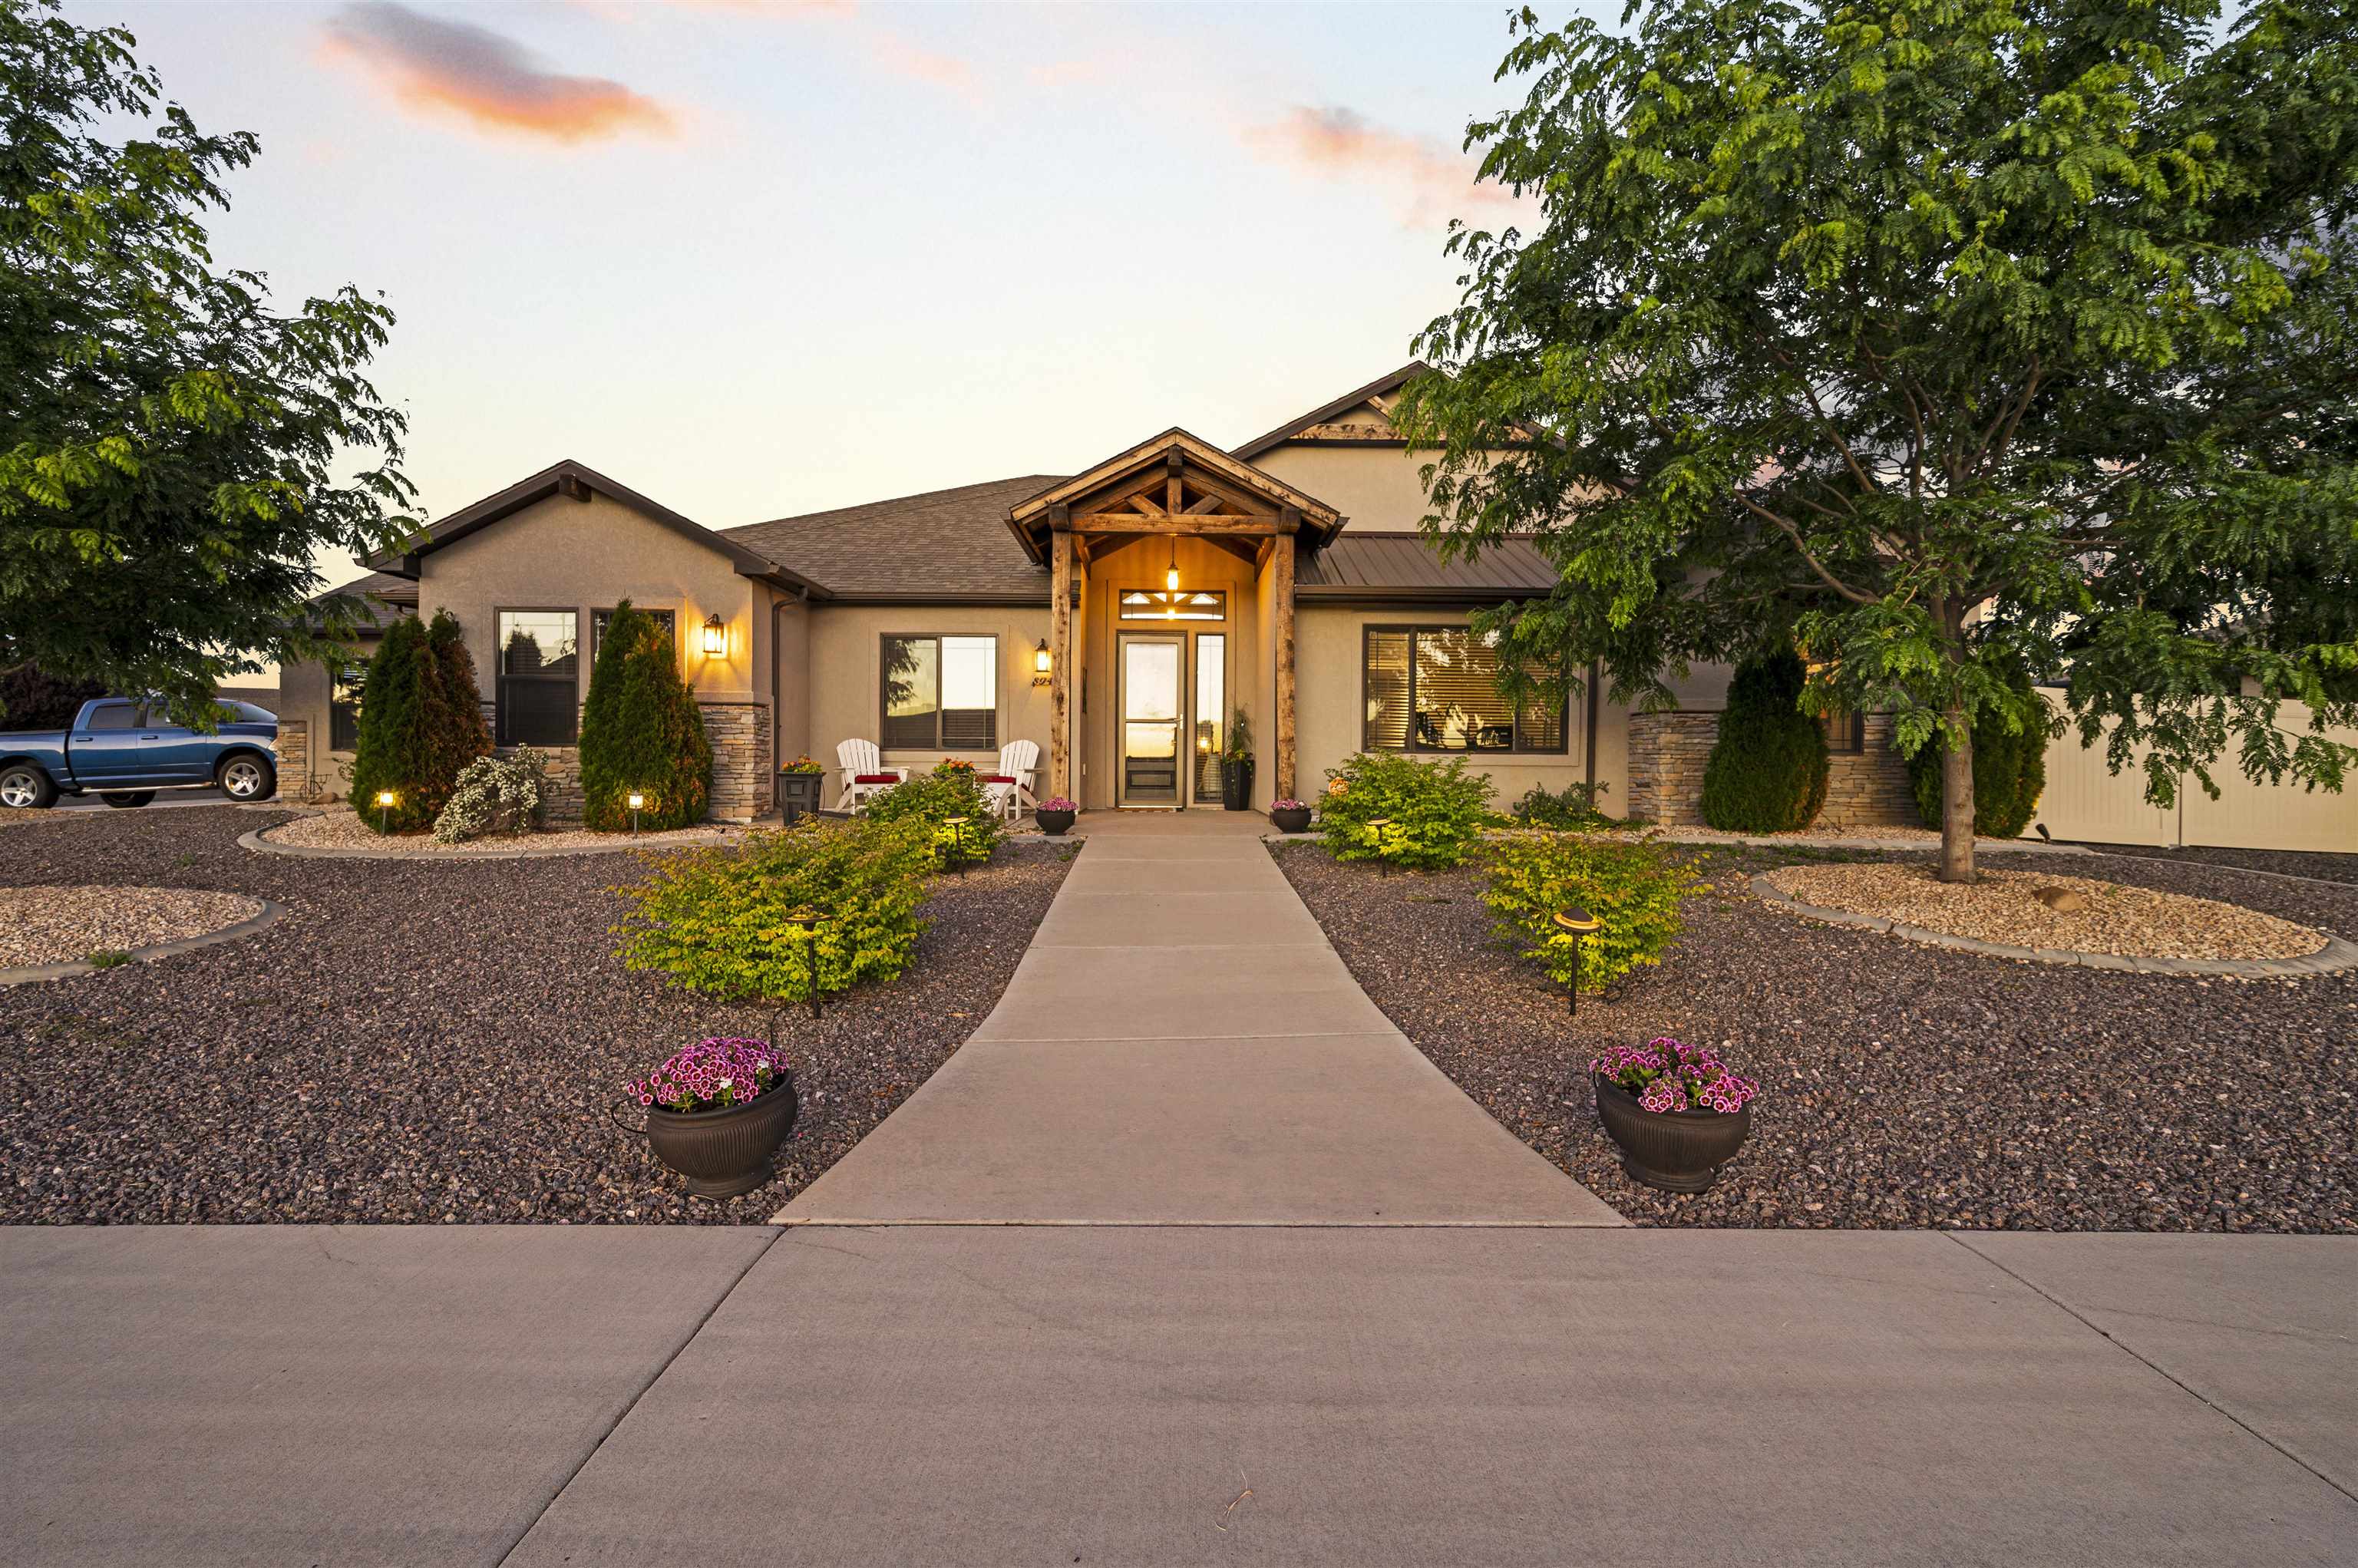 $100 in tamales with the purchase of this home! Award-Winning Dahl Built Homes constructed this impressive beauty! High-end upgrades and finishes throughout. Superb location: Watch the 4th of July fireworks from your front yard, 4 min to Adobe Creek Ntl Golf Course, 6min to downtown Fruita where local craft beer and local eateries abound, minutes from trailheads, horse-riding, fishing, rodeo, wine-tasting, outdoor activities. Bike world famous single track trails and enjoy the dynamic 30+ yearly events, festivals, and farmer's market close to home. Rustic wood beams adorn vaulted ceilings and accentuate walls, generous quartz countertops in inviting open kitchen, floor to ceiling shelving in oversized pantry, fill the wine cooler with your favorites from local wineries, custom dimmable lighting in primary bedroom ceiling tray, dual shower heads in primary bath, exceptional outdoor living space with built-in natural gas fire pit & two custom pergolas, RV parking accommodates your camper/toys, corner lot, great schools nearby - come fall in love with the home and the best of Fruita! All information including but not limited to square footage, measurements, acreage & lot measurements, HOA/CIC fees, pricing & availability are subject to change/error, without notice. Buyer (s) to verify all.